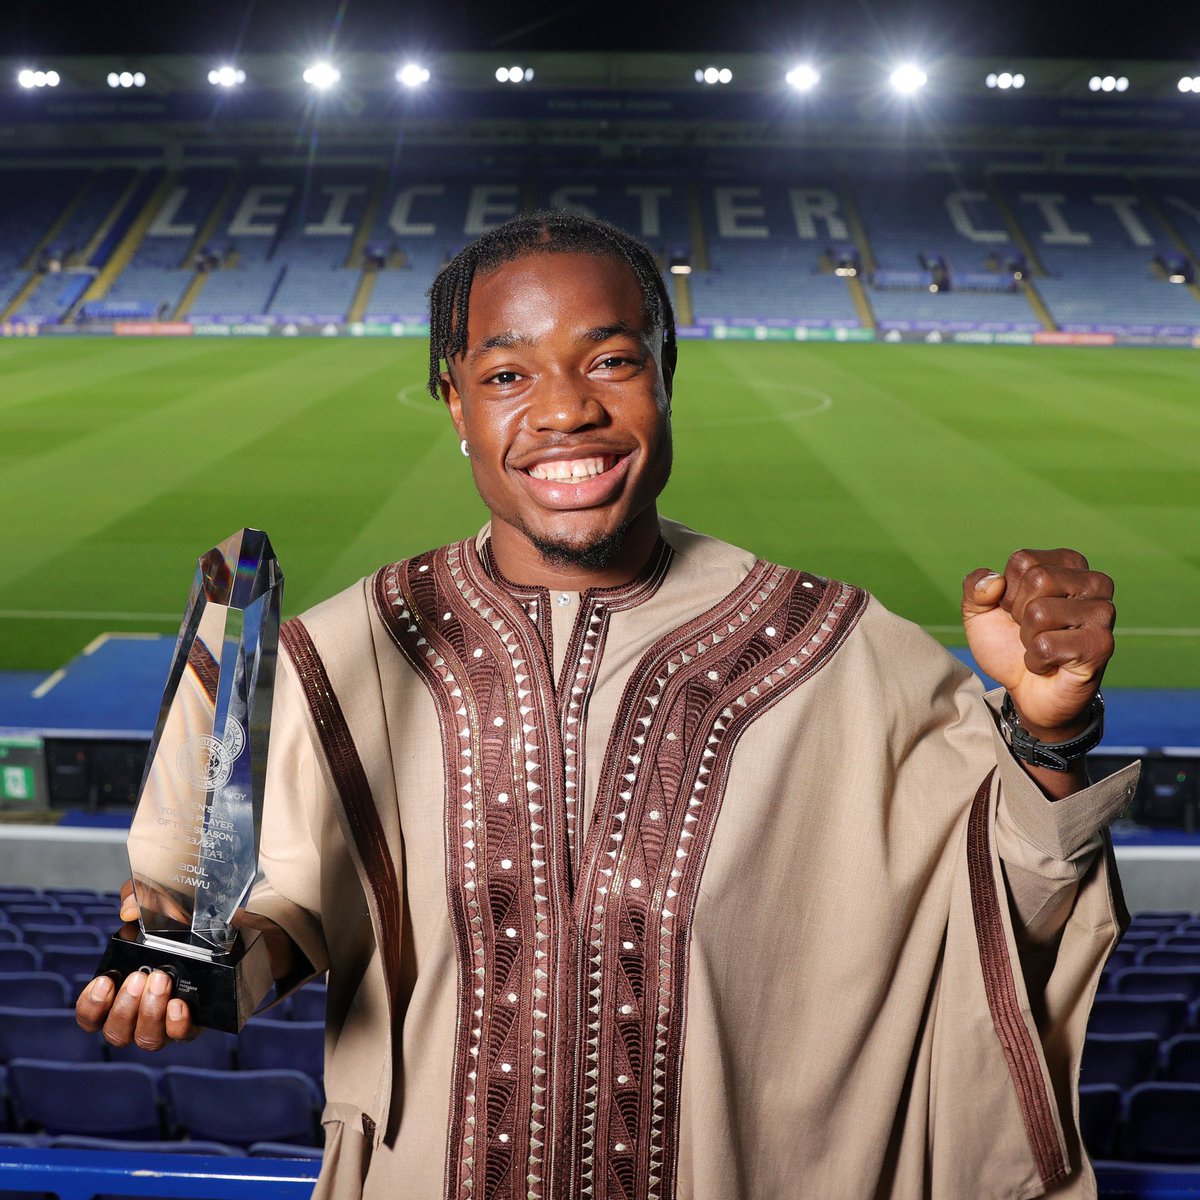 🇬🇭 Fatawu Issahaku wins Leicester City Young Player of the season award • 39 games • 32 big chances created • 13 assists • 6 goals In the Championship this season. He came (on loan), saw and conquered. ⚽️